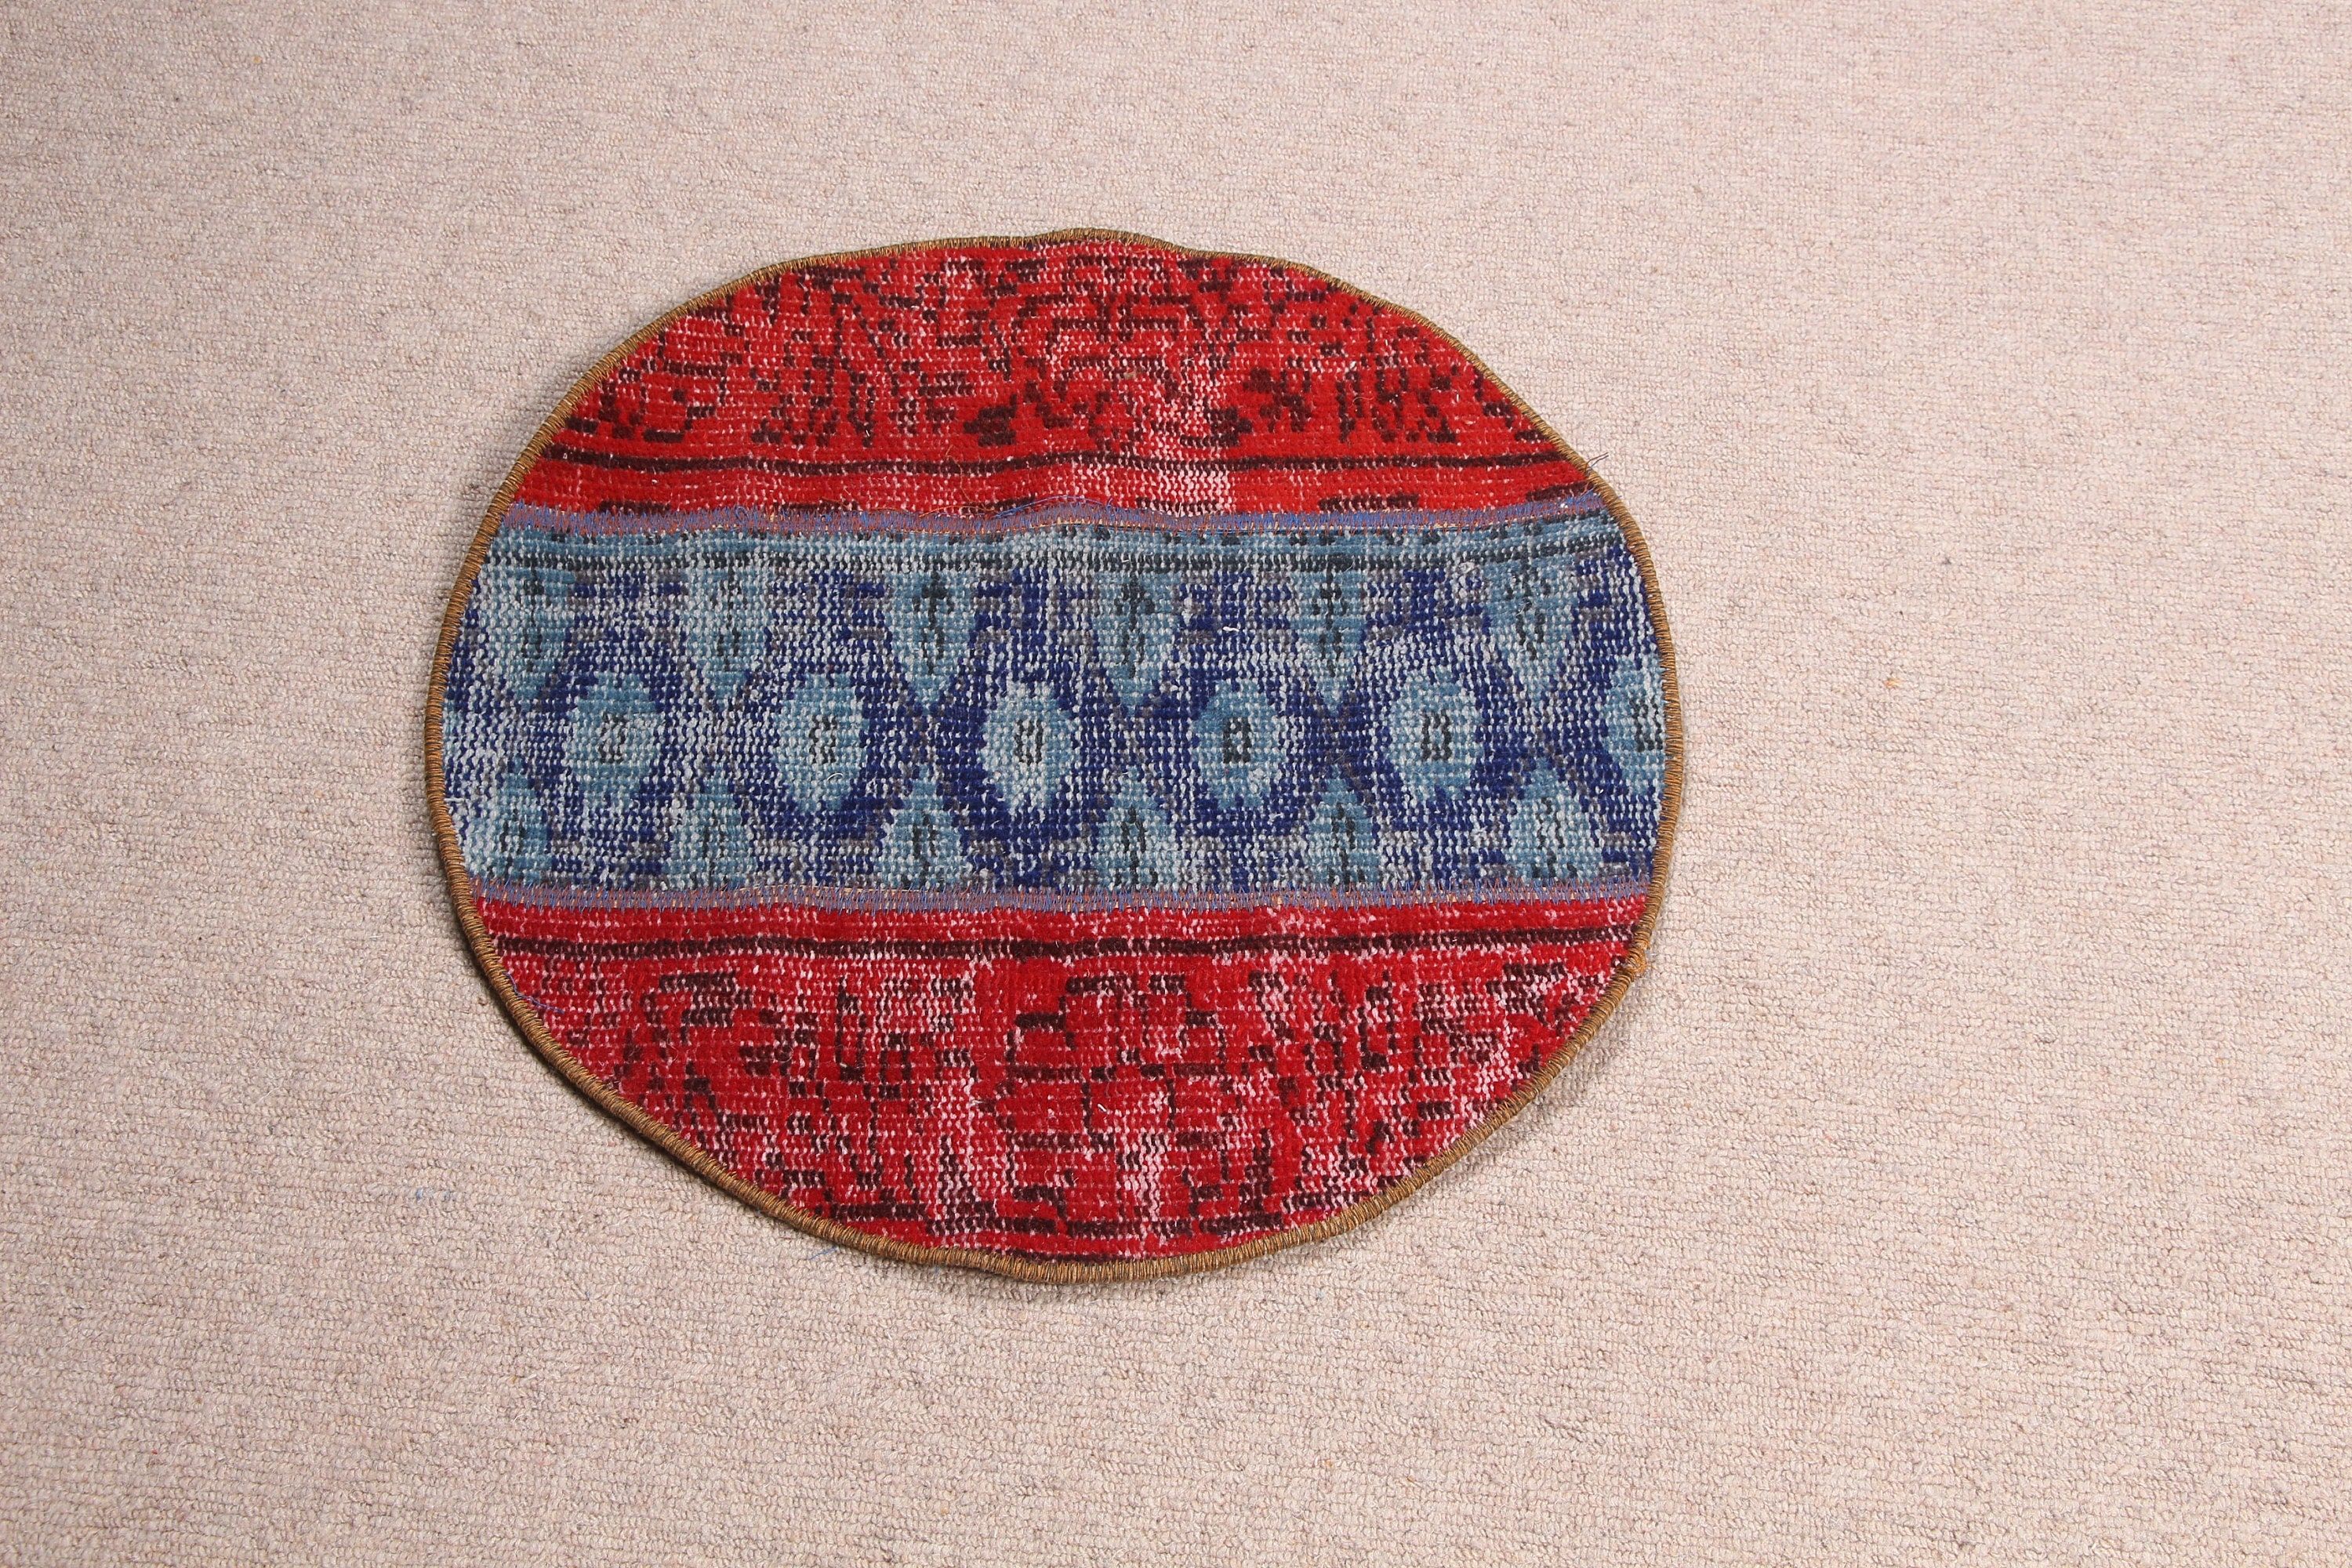 Old Rug, Rugs for Entry, Car Mat Rug, Kitchen Rugs, Red Cool Rug, Nursery Rugs, Turkish Rug, Vintage Rug, Oushak Rugs, 1.7x1.7 ft Small Rug